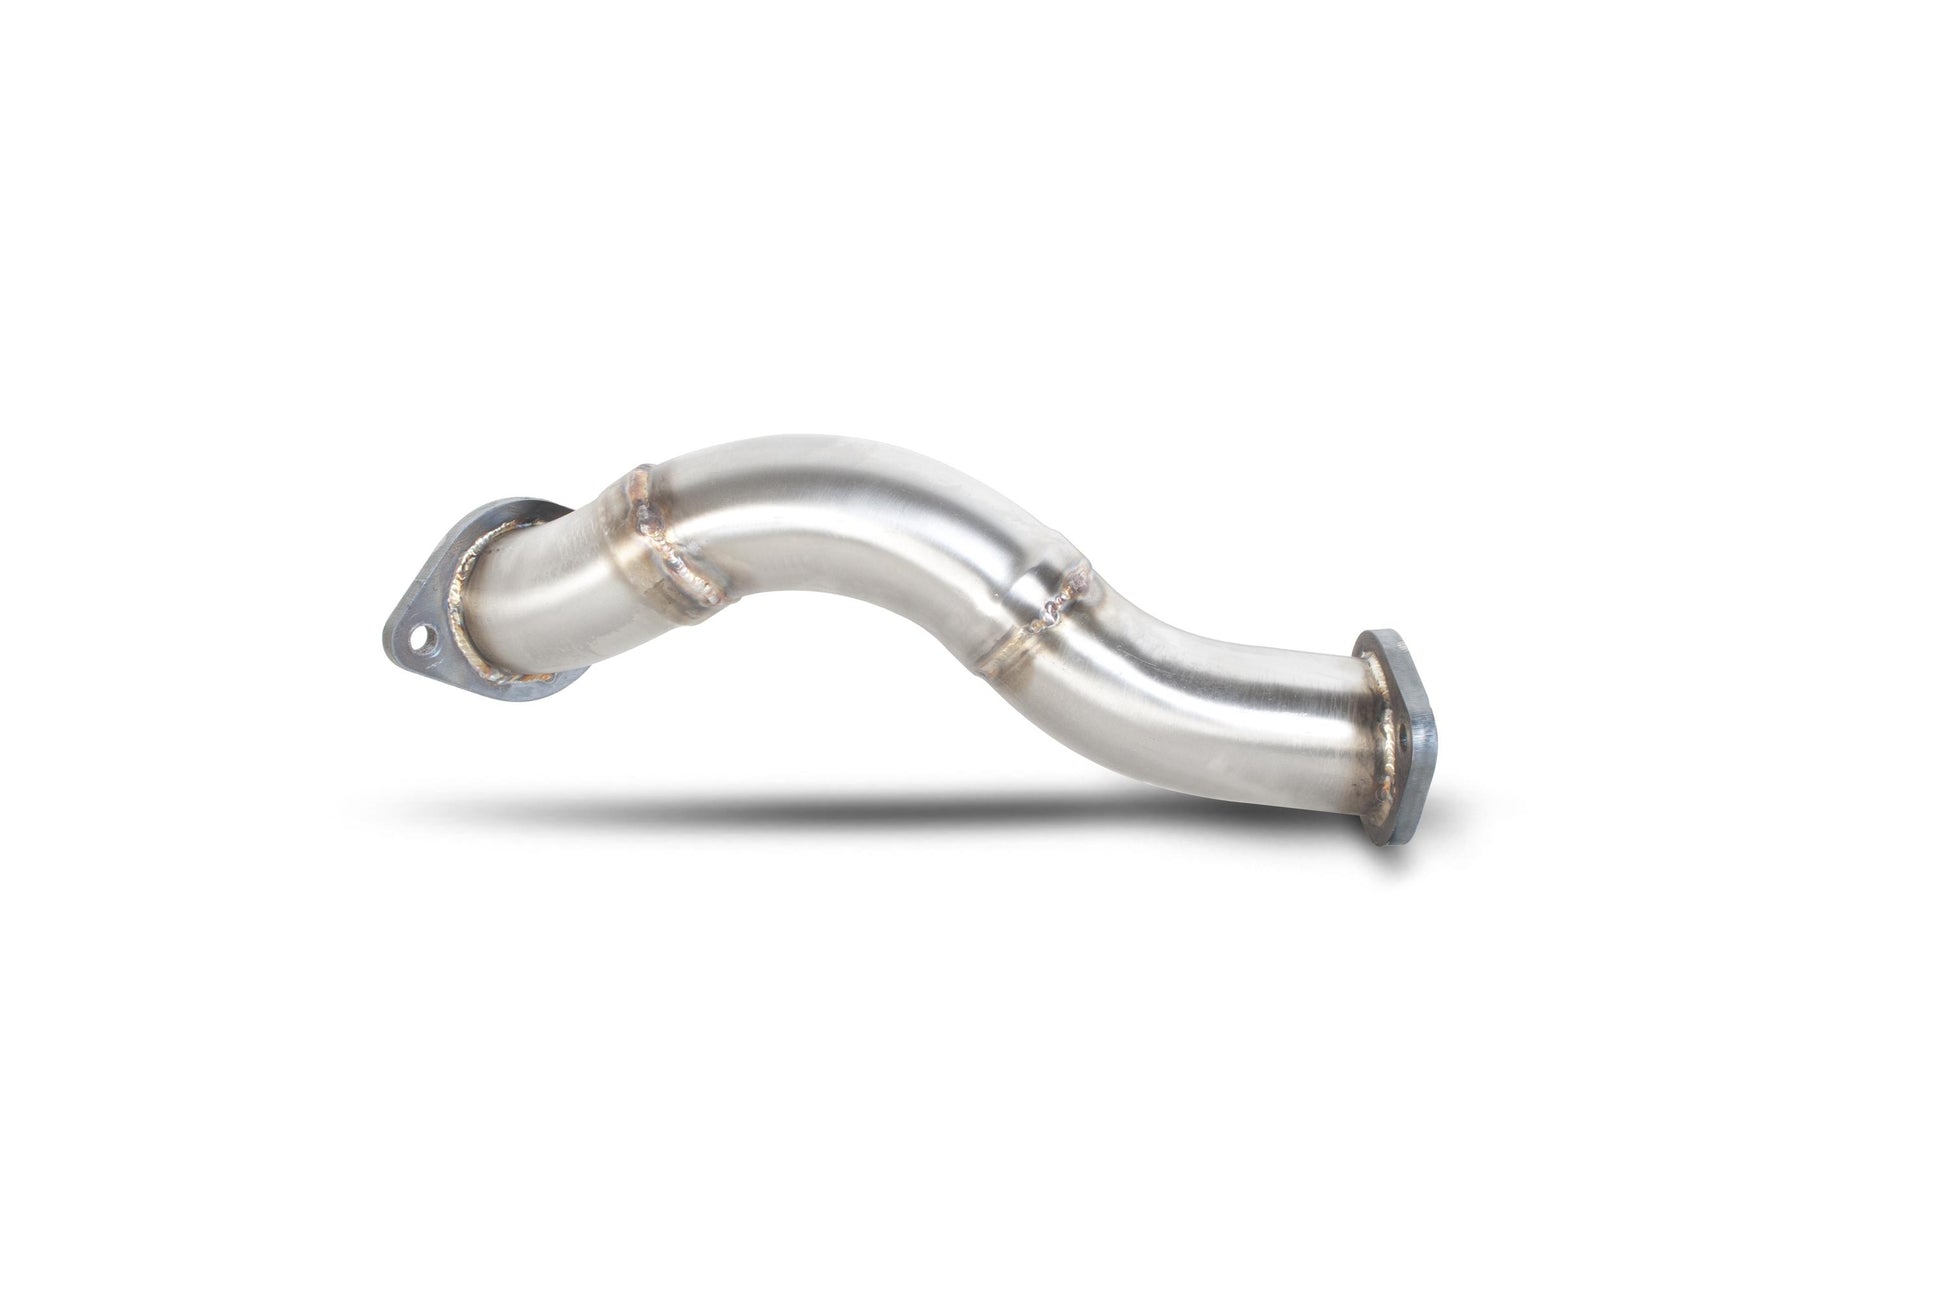 Scorpion Up-pipe - Subaru GT86-Scion FR-S-BRZ Non GPF Model Only